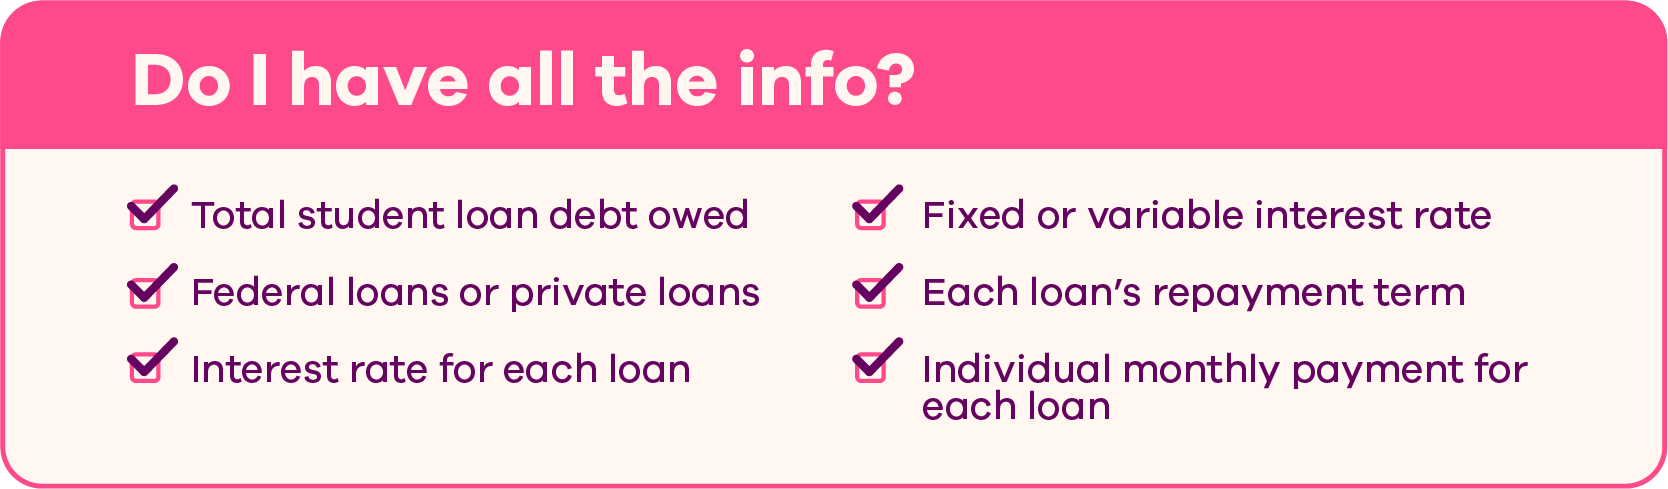 Pink graphic with a header that says “Do I have all the info?” and check boxes with the following list checked: Total student loan debt owed, Federal loans or private loans, Interest rate for each loan, Fixed or variable interest rate, Each loan’s repayment term, Individual monthly payment for each loan